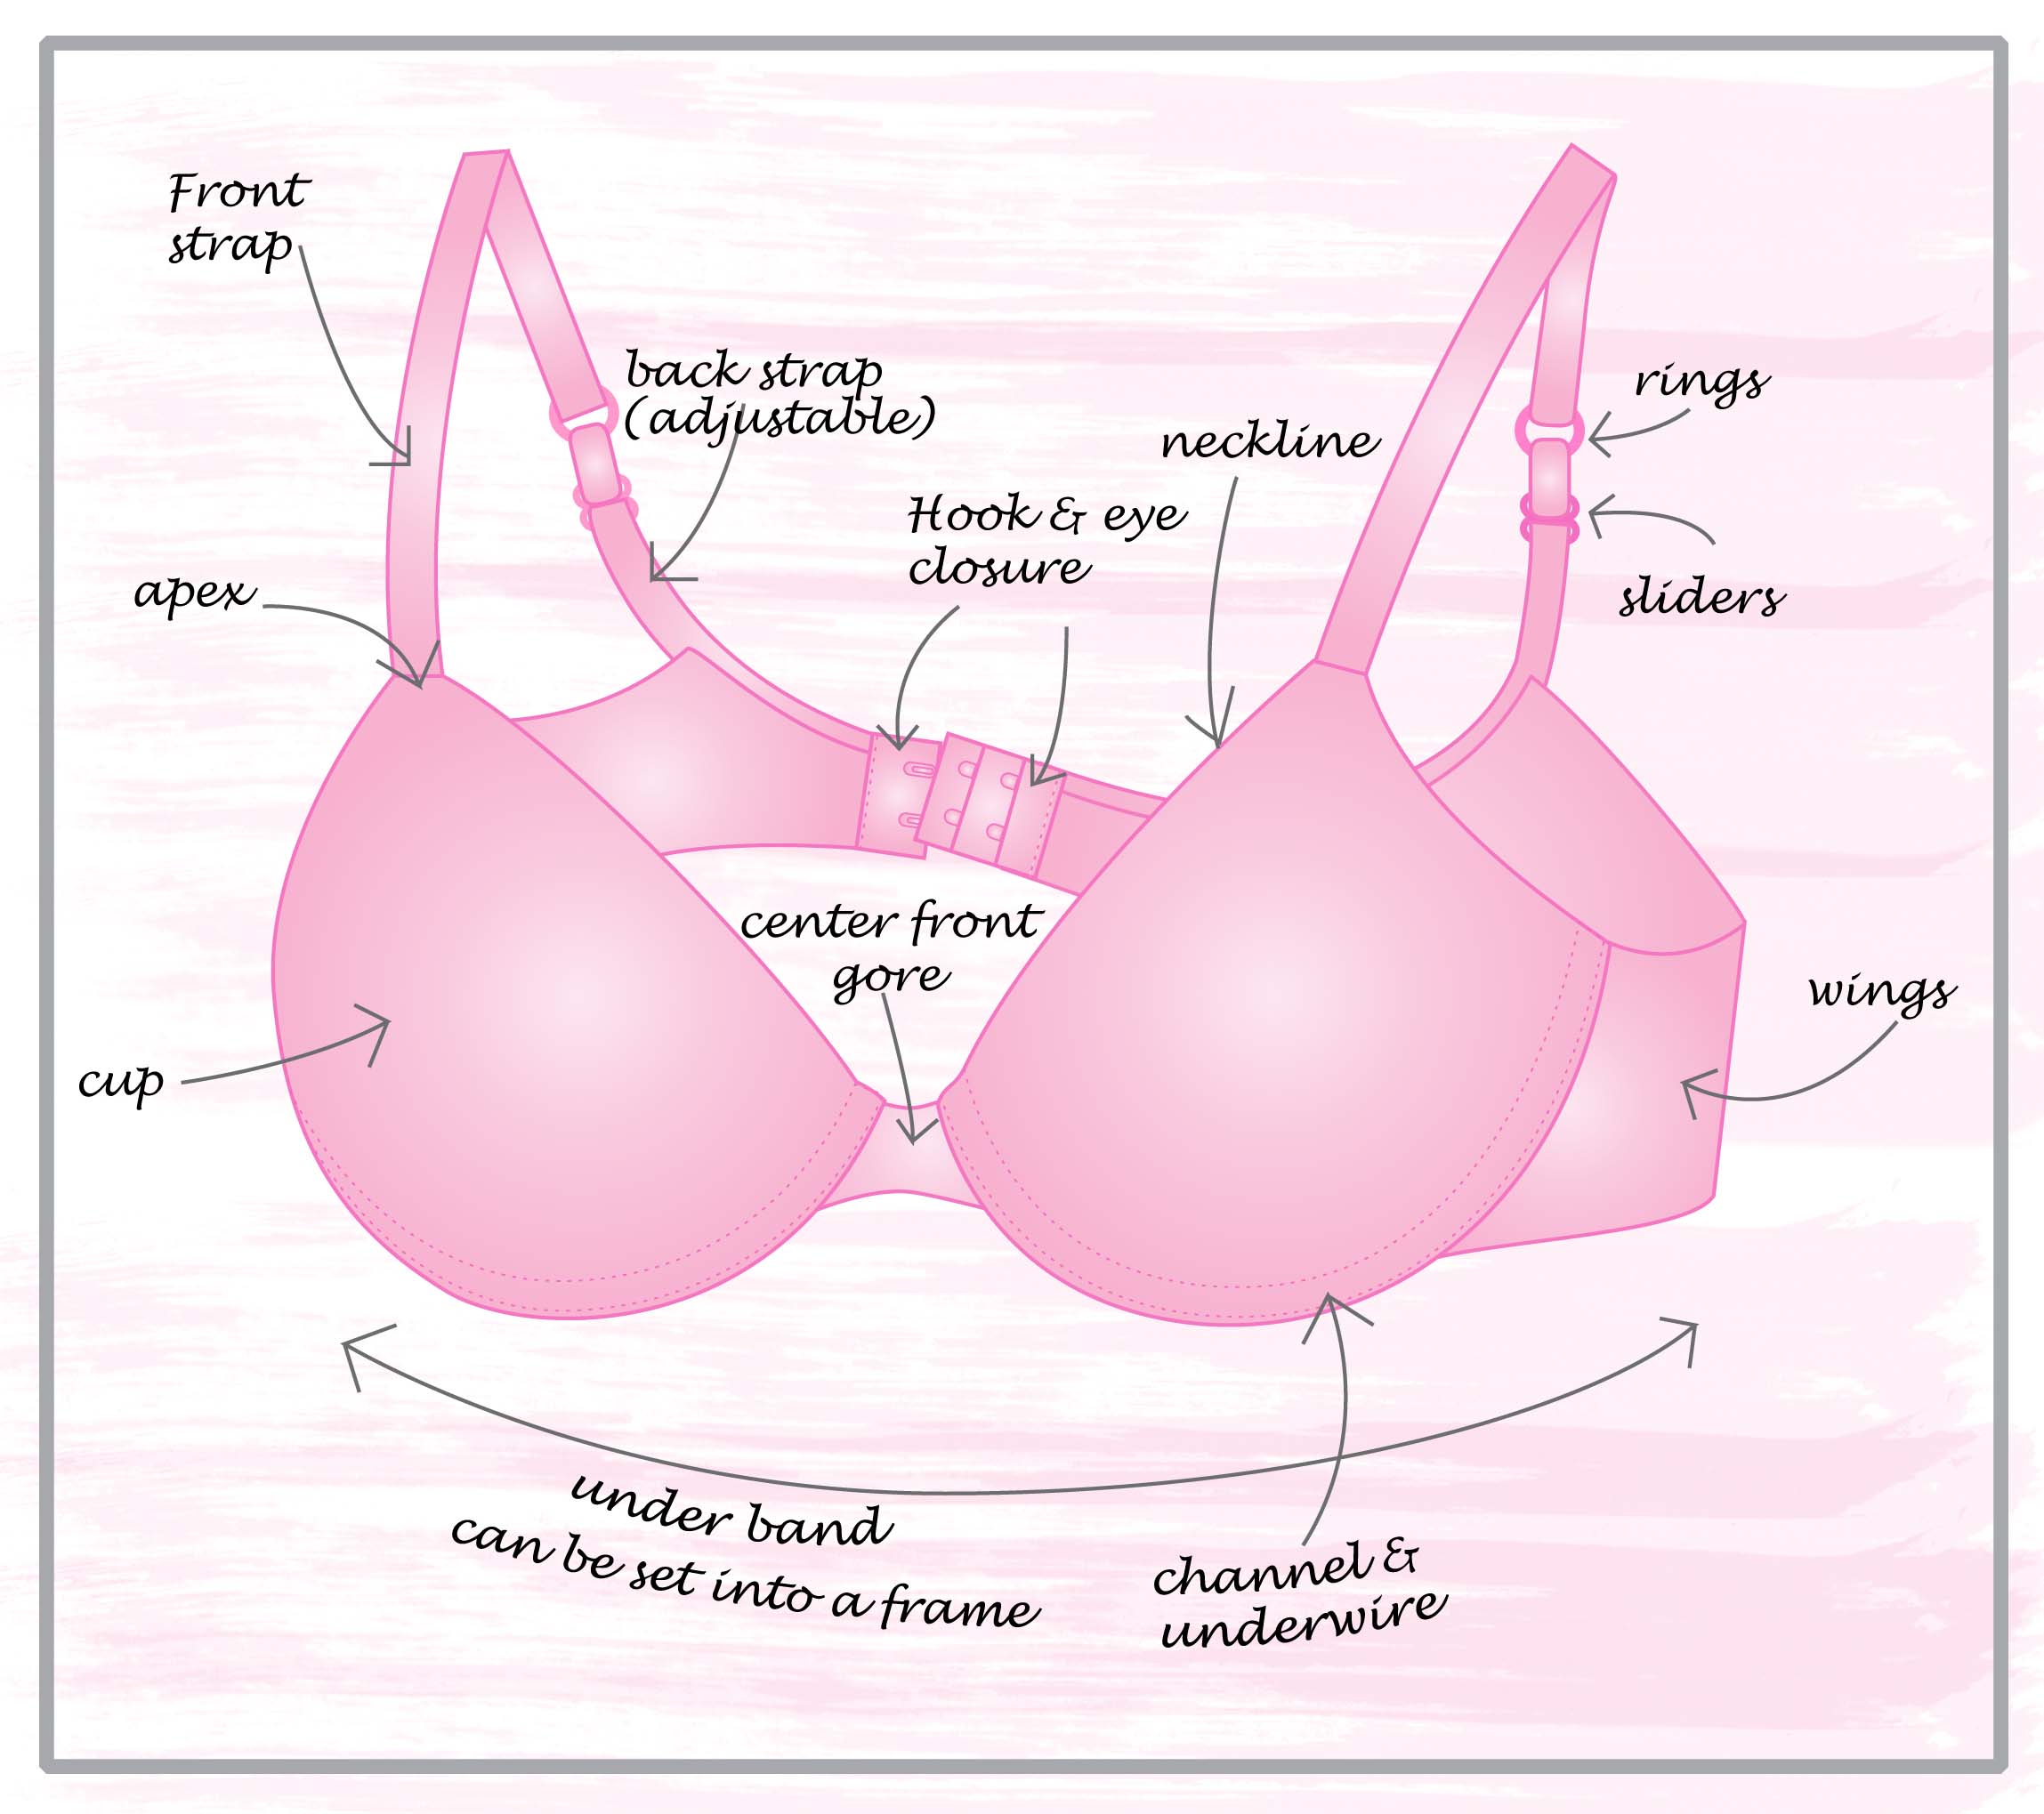 Parts of a Bra: Learn More About Bra Anatomy, Leonisa